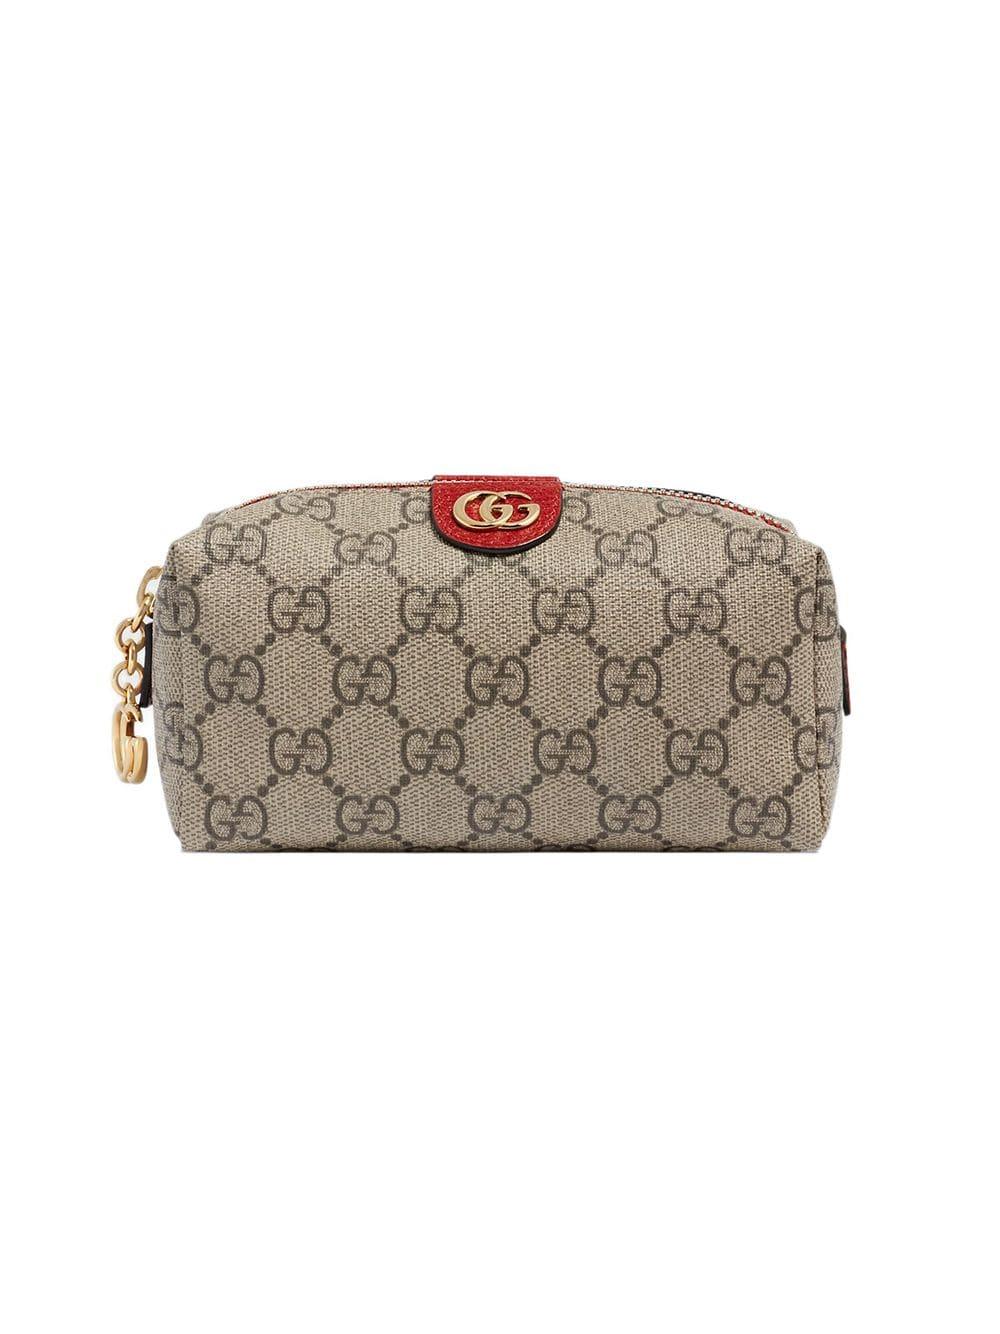 Gucci Ophidia GG Supreme Toiletry Bag